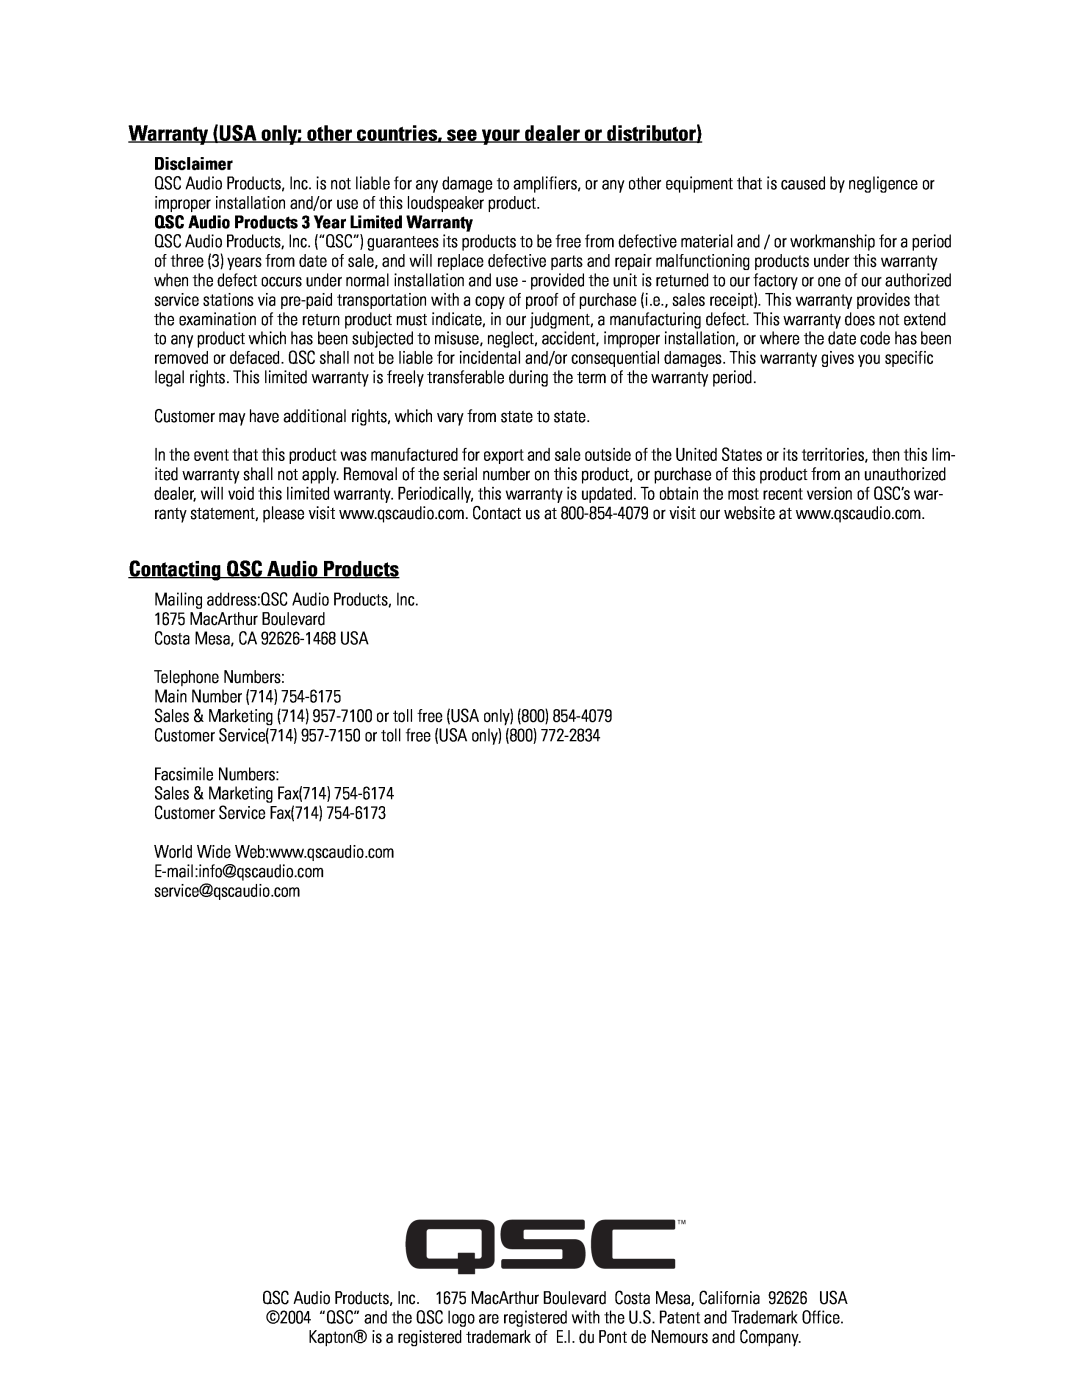 QSC Audio SC-322X specifications Contacting QSC Audio Products, Costa Mesa, CA 92626-1468USA Telephone Numbers 